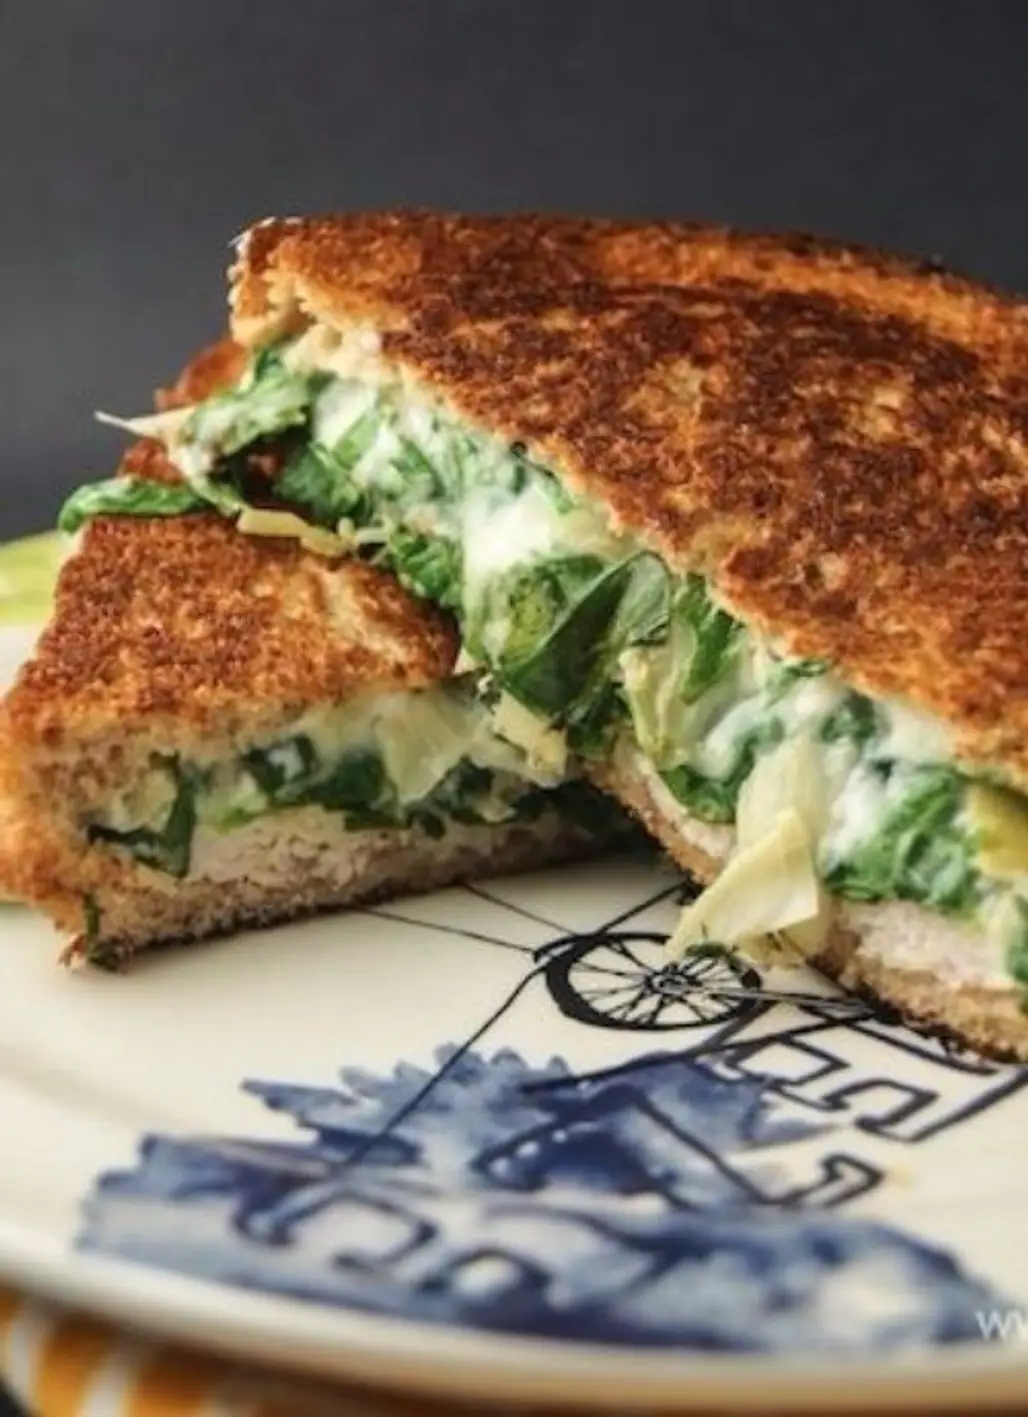 I Just Know You're Going to Love This Fresh Take on Grilled Cheese: Spinach and Artichoke Grilled Cheese